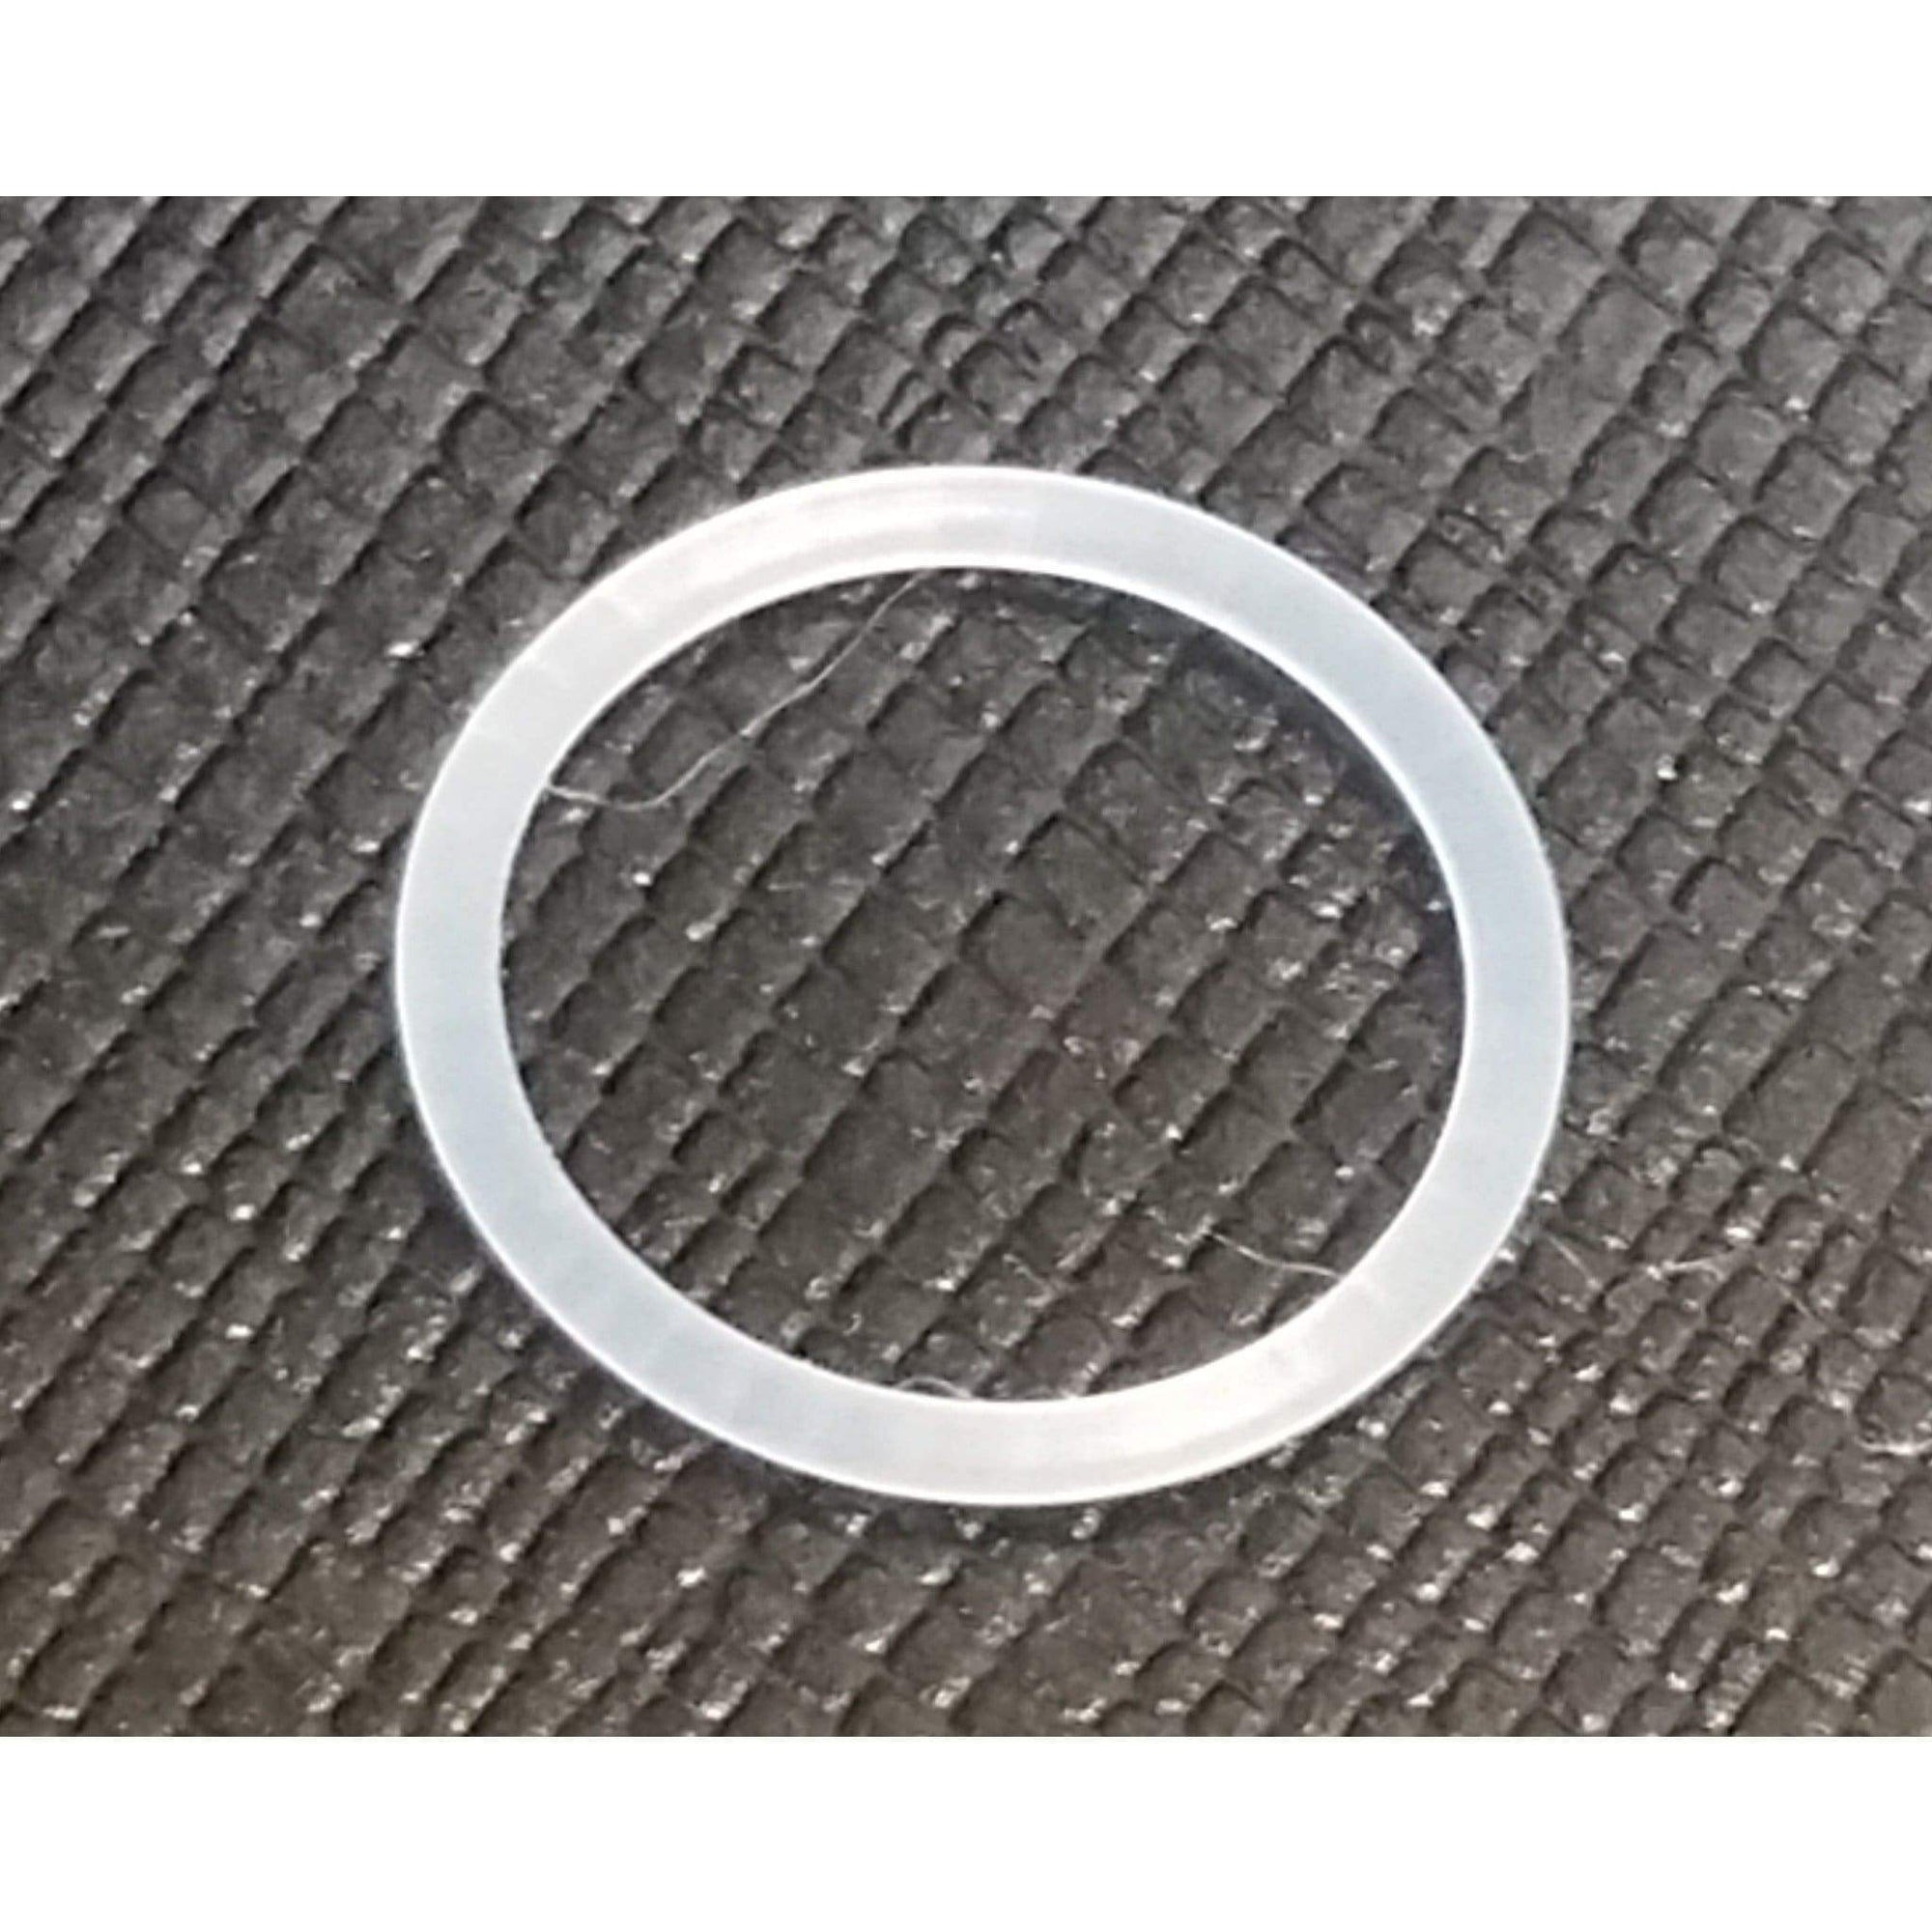 TFV8 Replacement Seals Inside Tube Oring Seals/Oring's